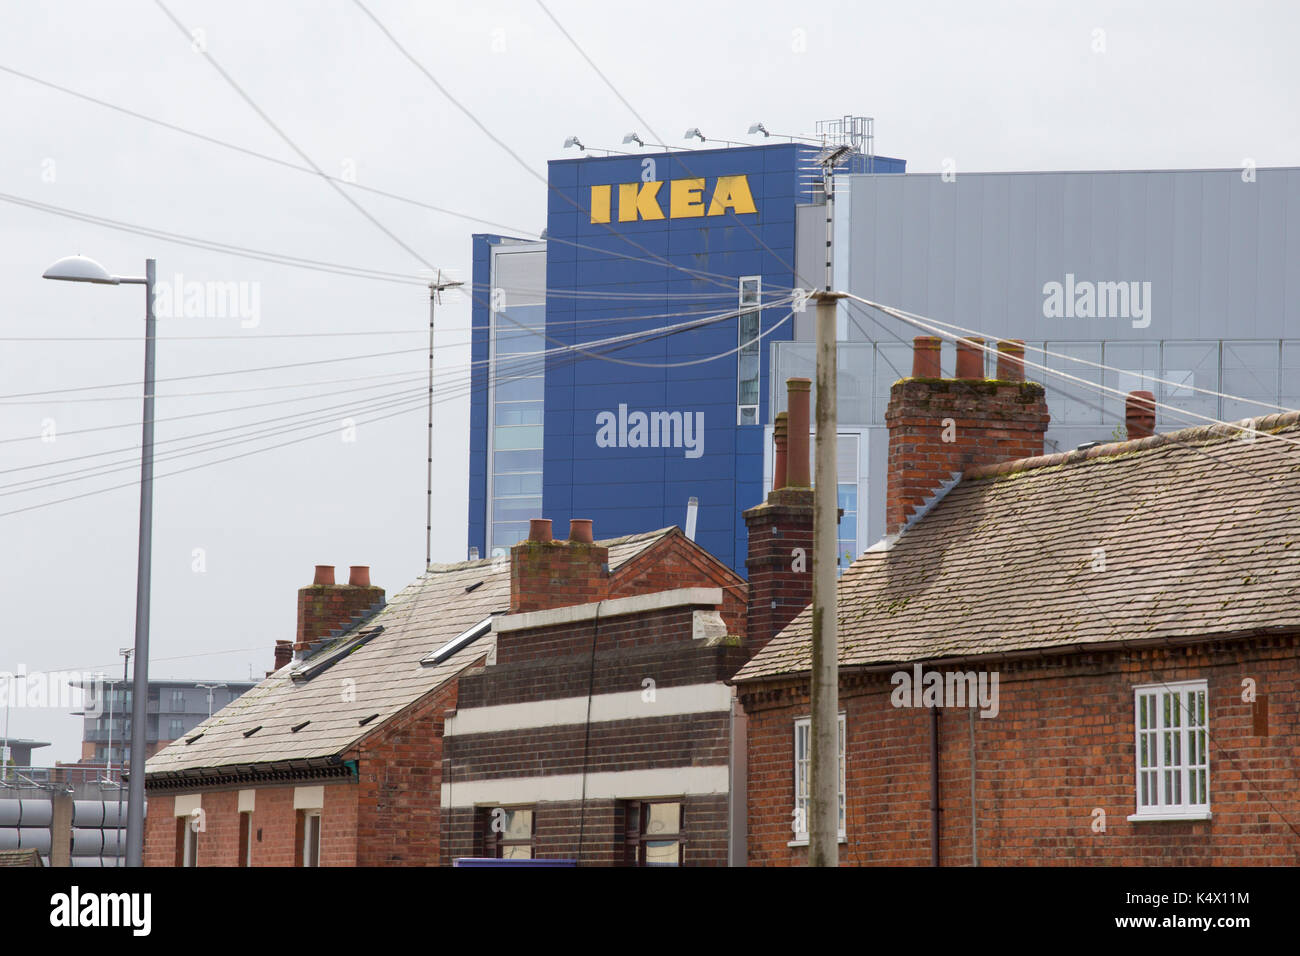 The Ikea store in Coventry, UK Stock Photo